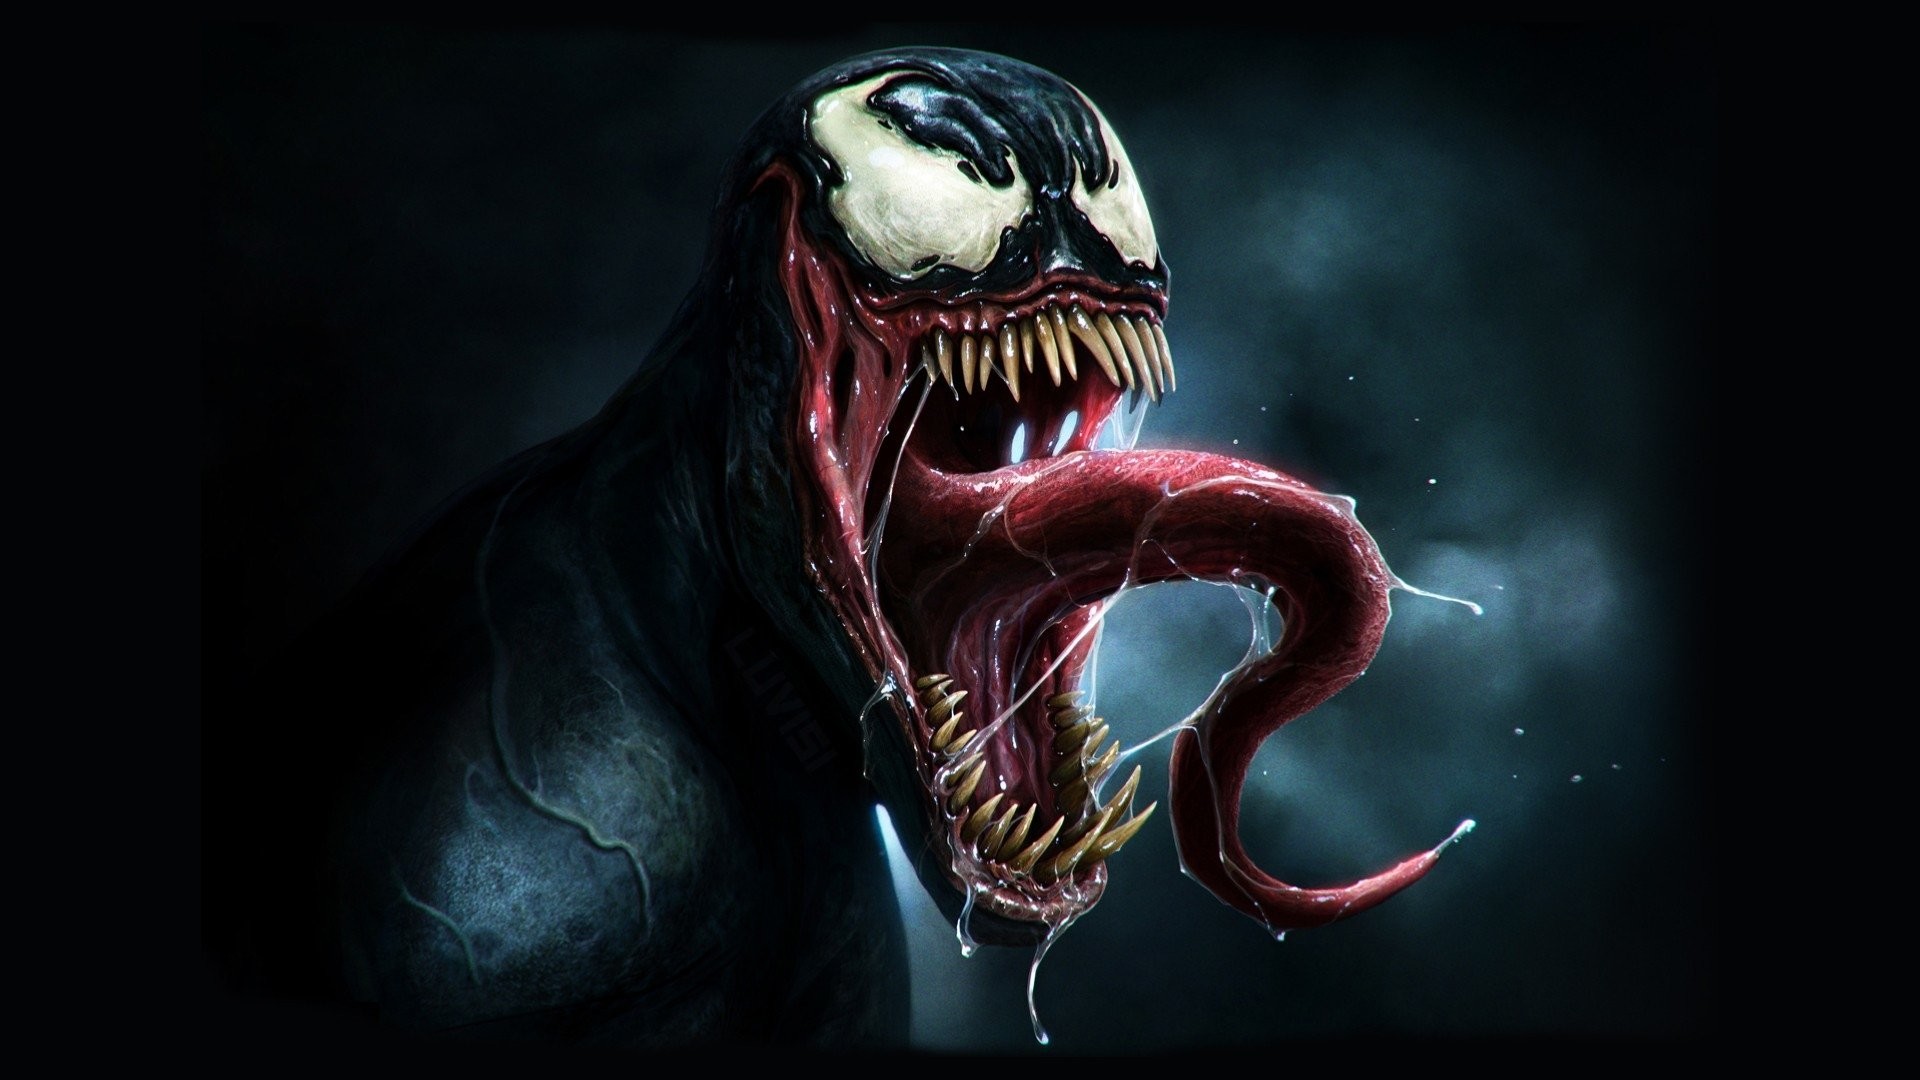 1920x1080 124 Venom HD Wallpapers | Backgrounds - Wallpaper Abyss